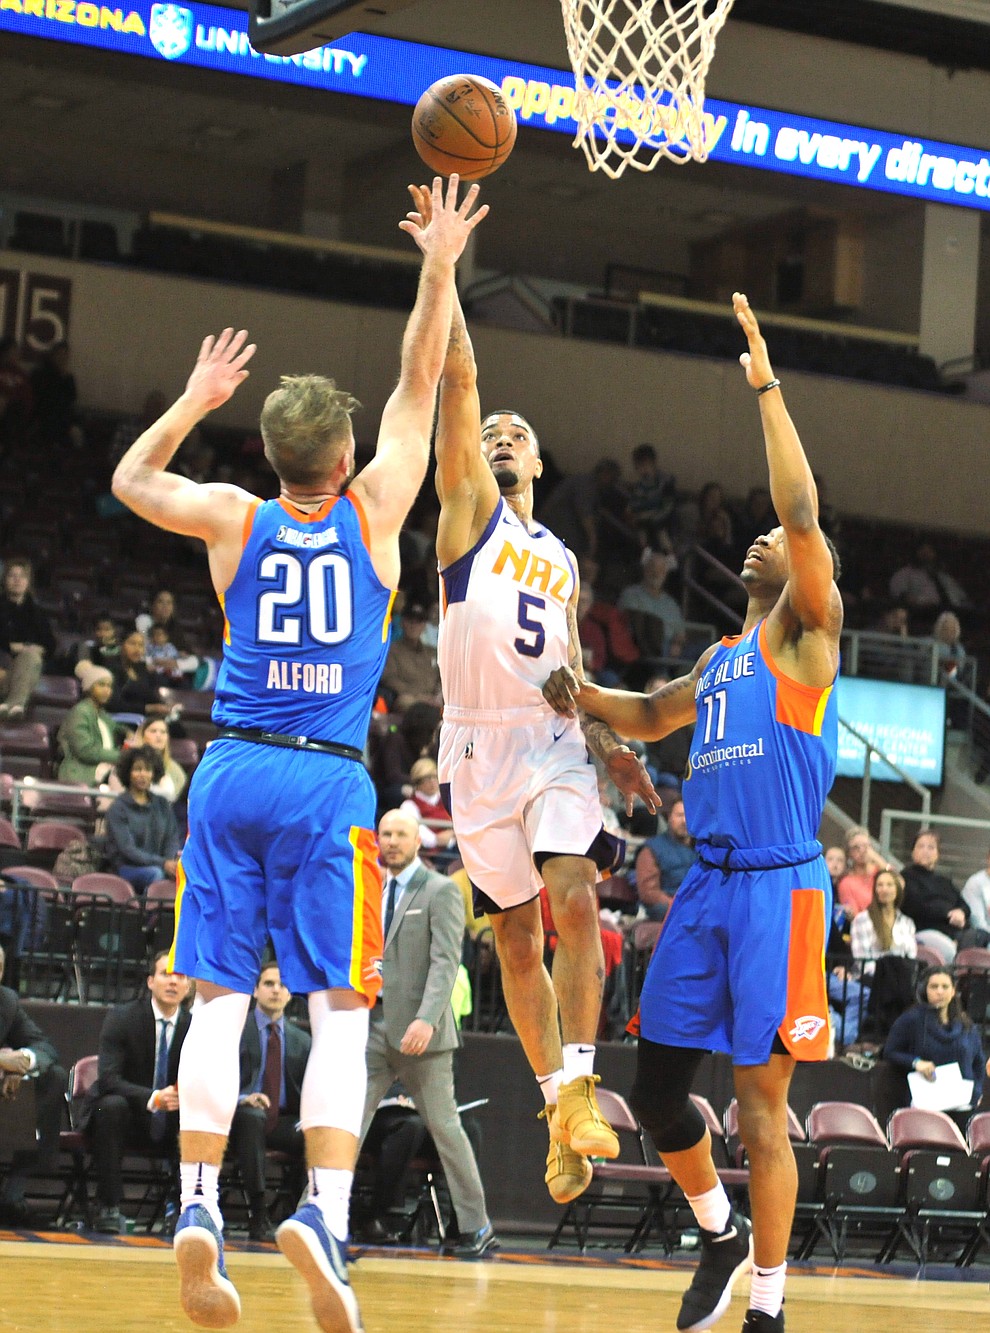 Northern Arizona's Josh Gray gets a finger roll to fall as the Suns take on the Oklahoma City Blue Friday night at the Prescott Valley Event Center.  (Les Stukenberg/Courier)